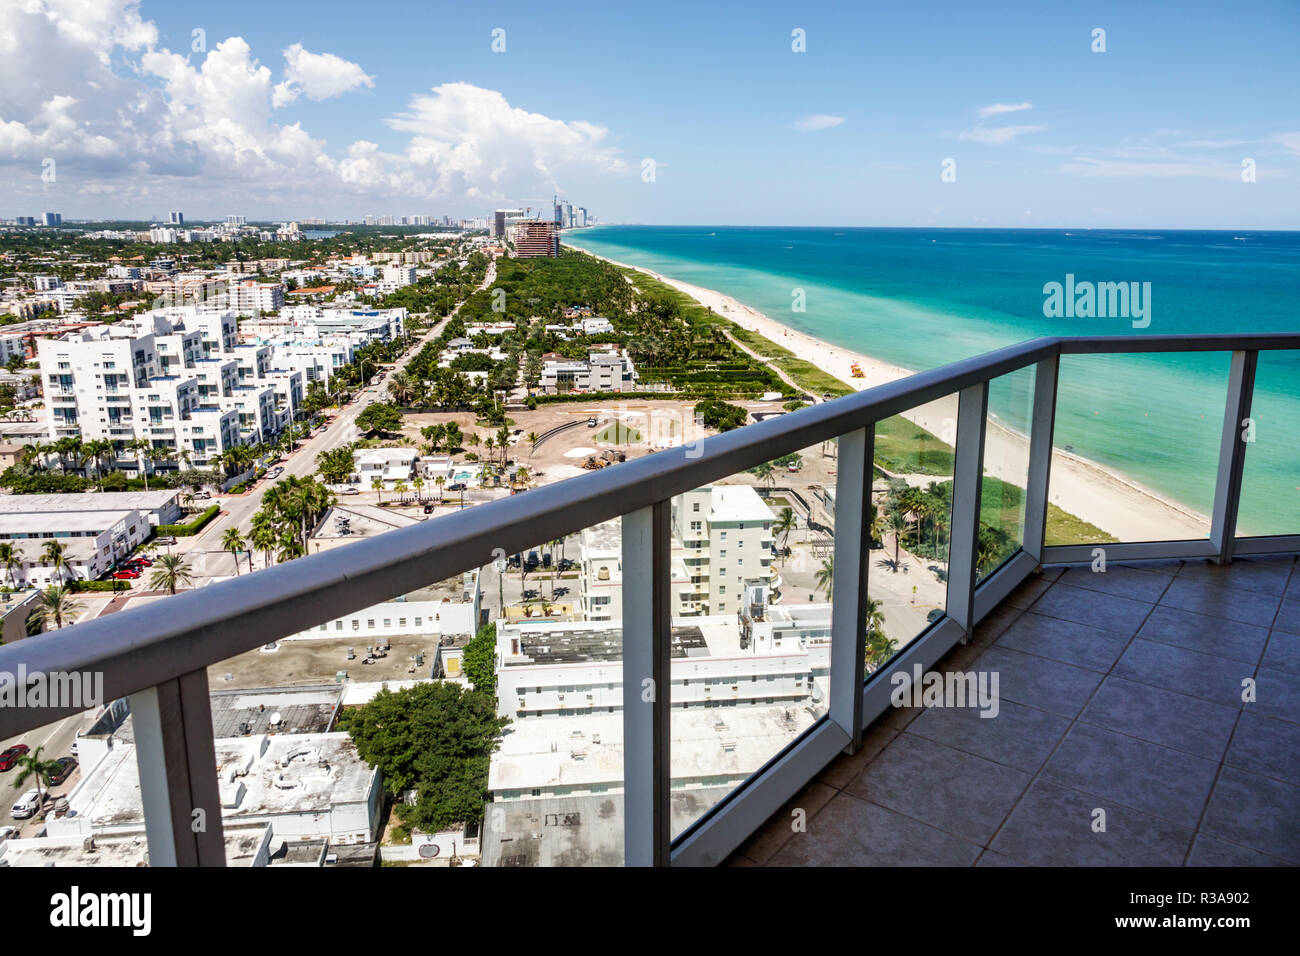 Miami Beach Florida,North Beach,condominium residential apartment apartments building buildings housing,balcony view,aerial overhead view from above,A Stock Photo